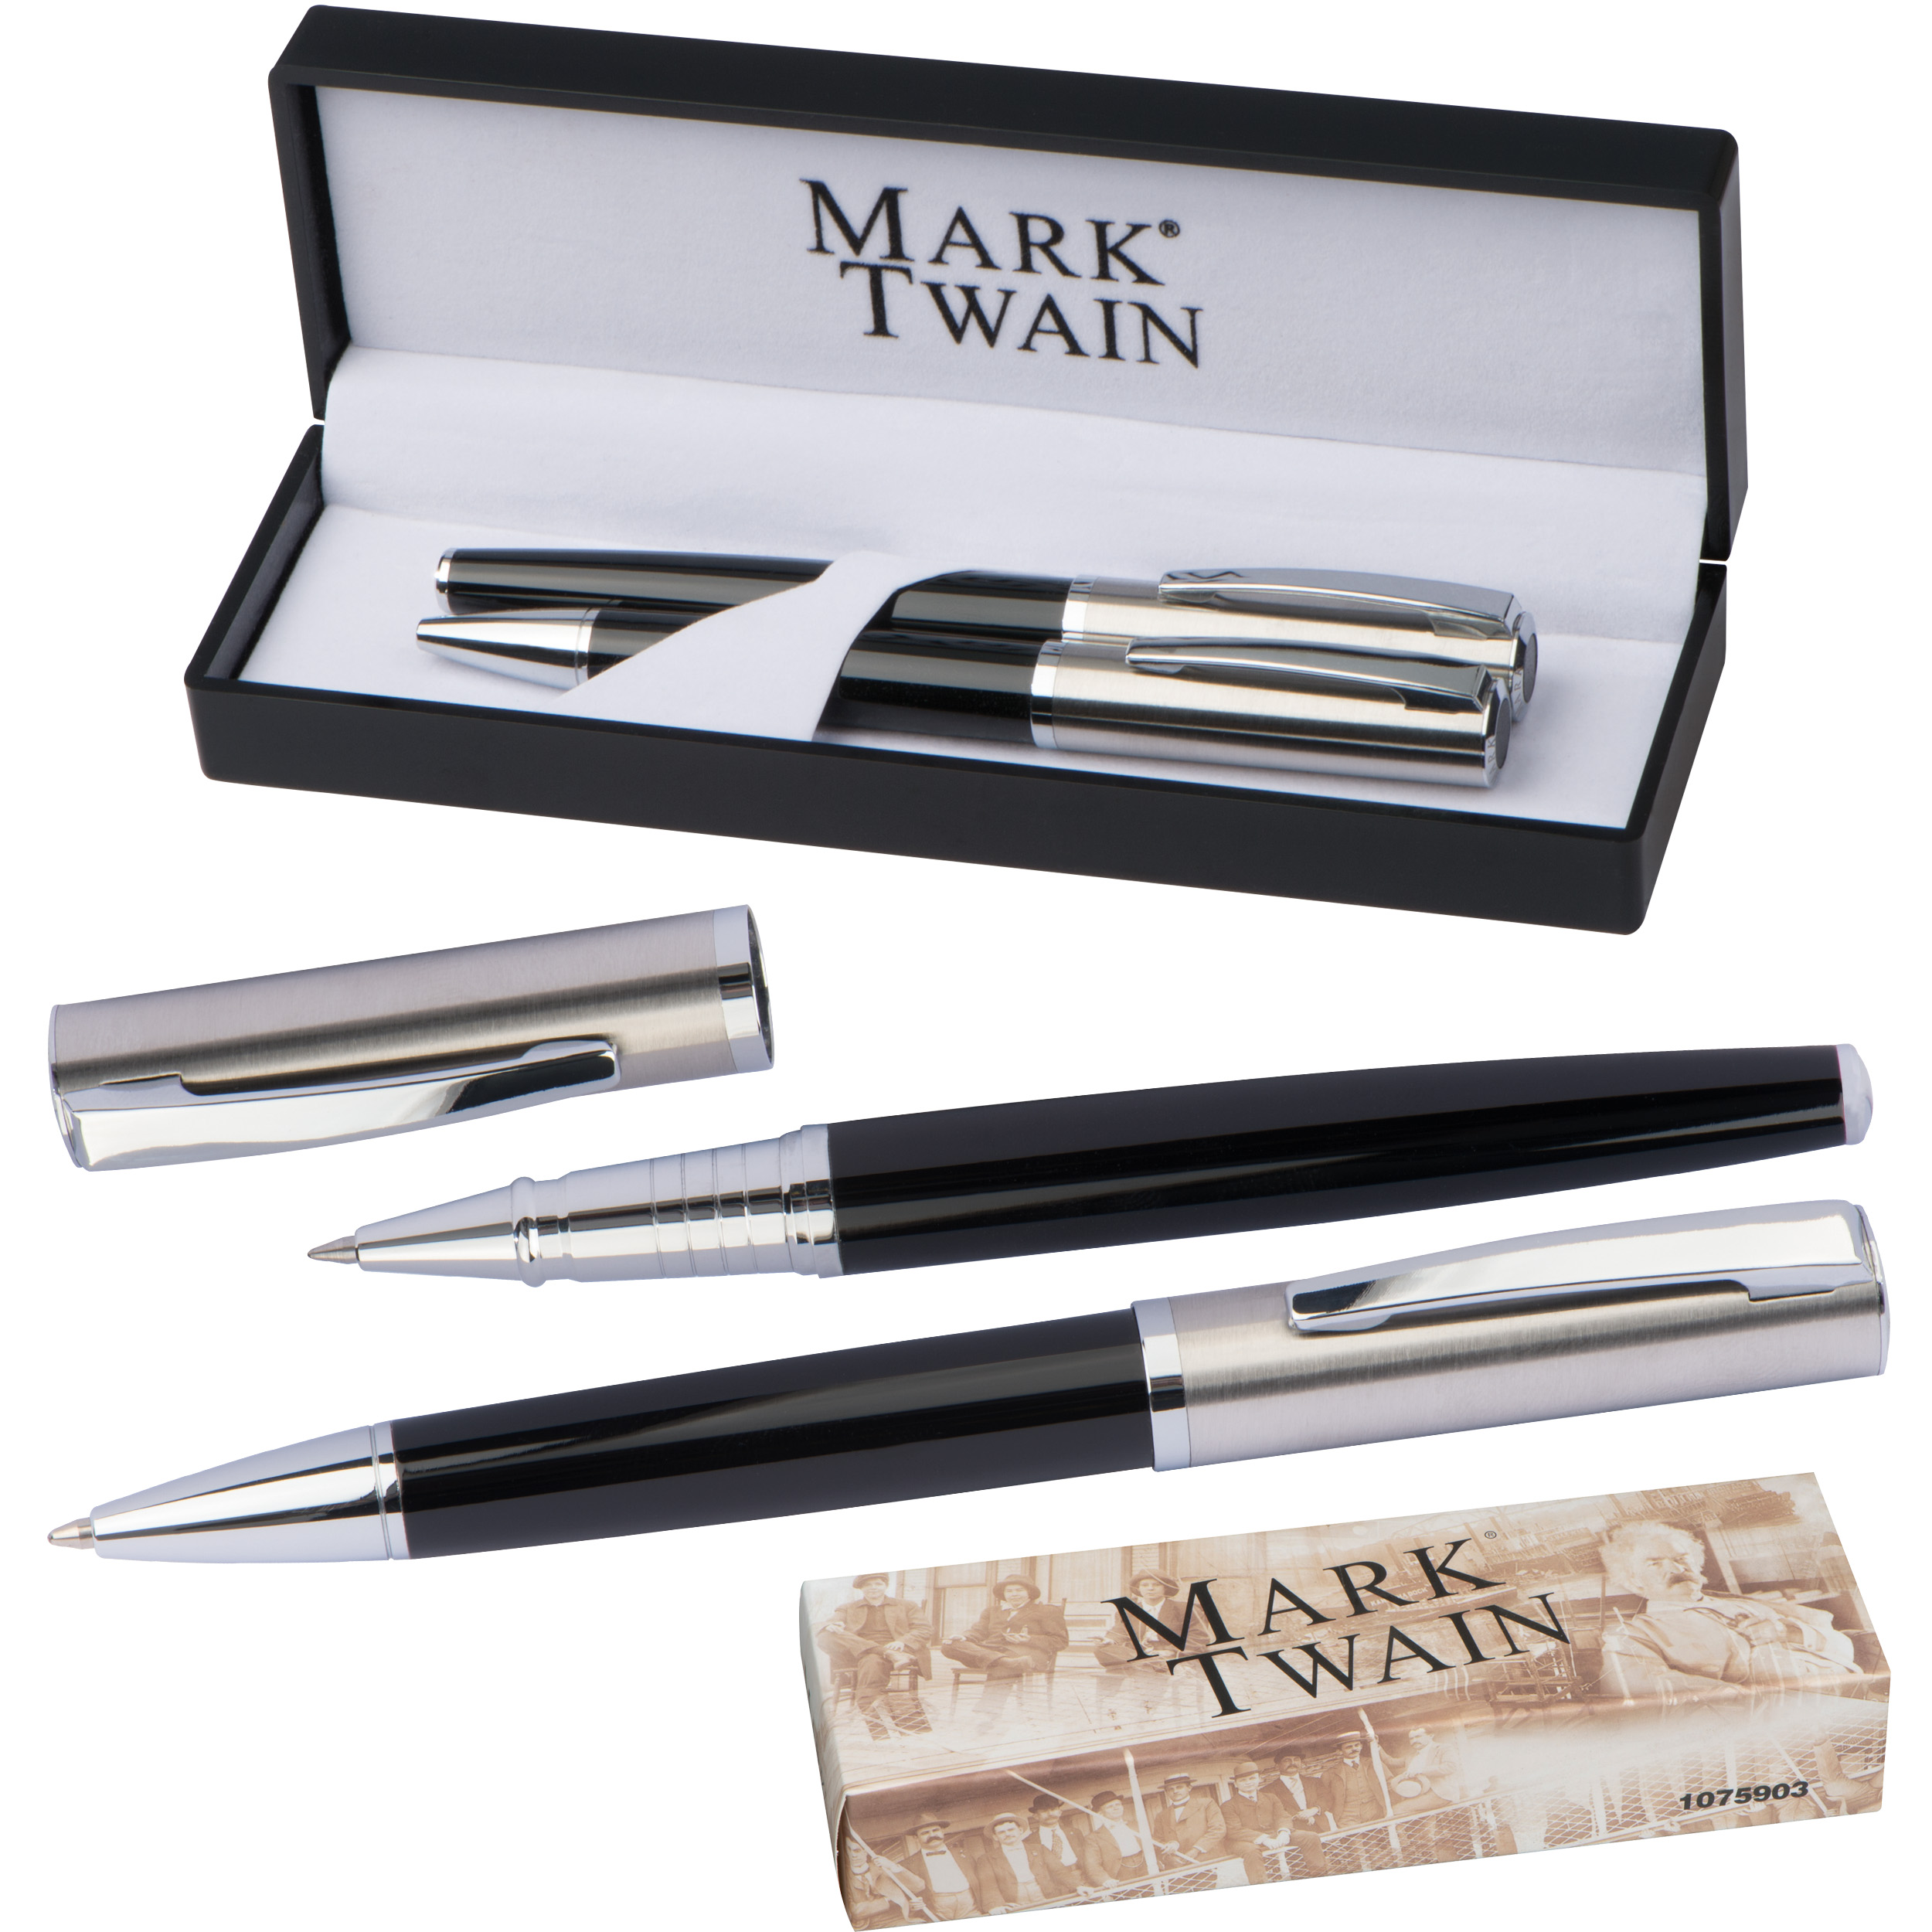 Mark Twain writing set with ball pen and rollerball pen